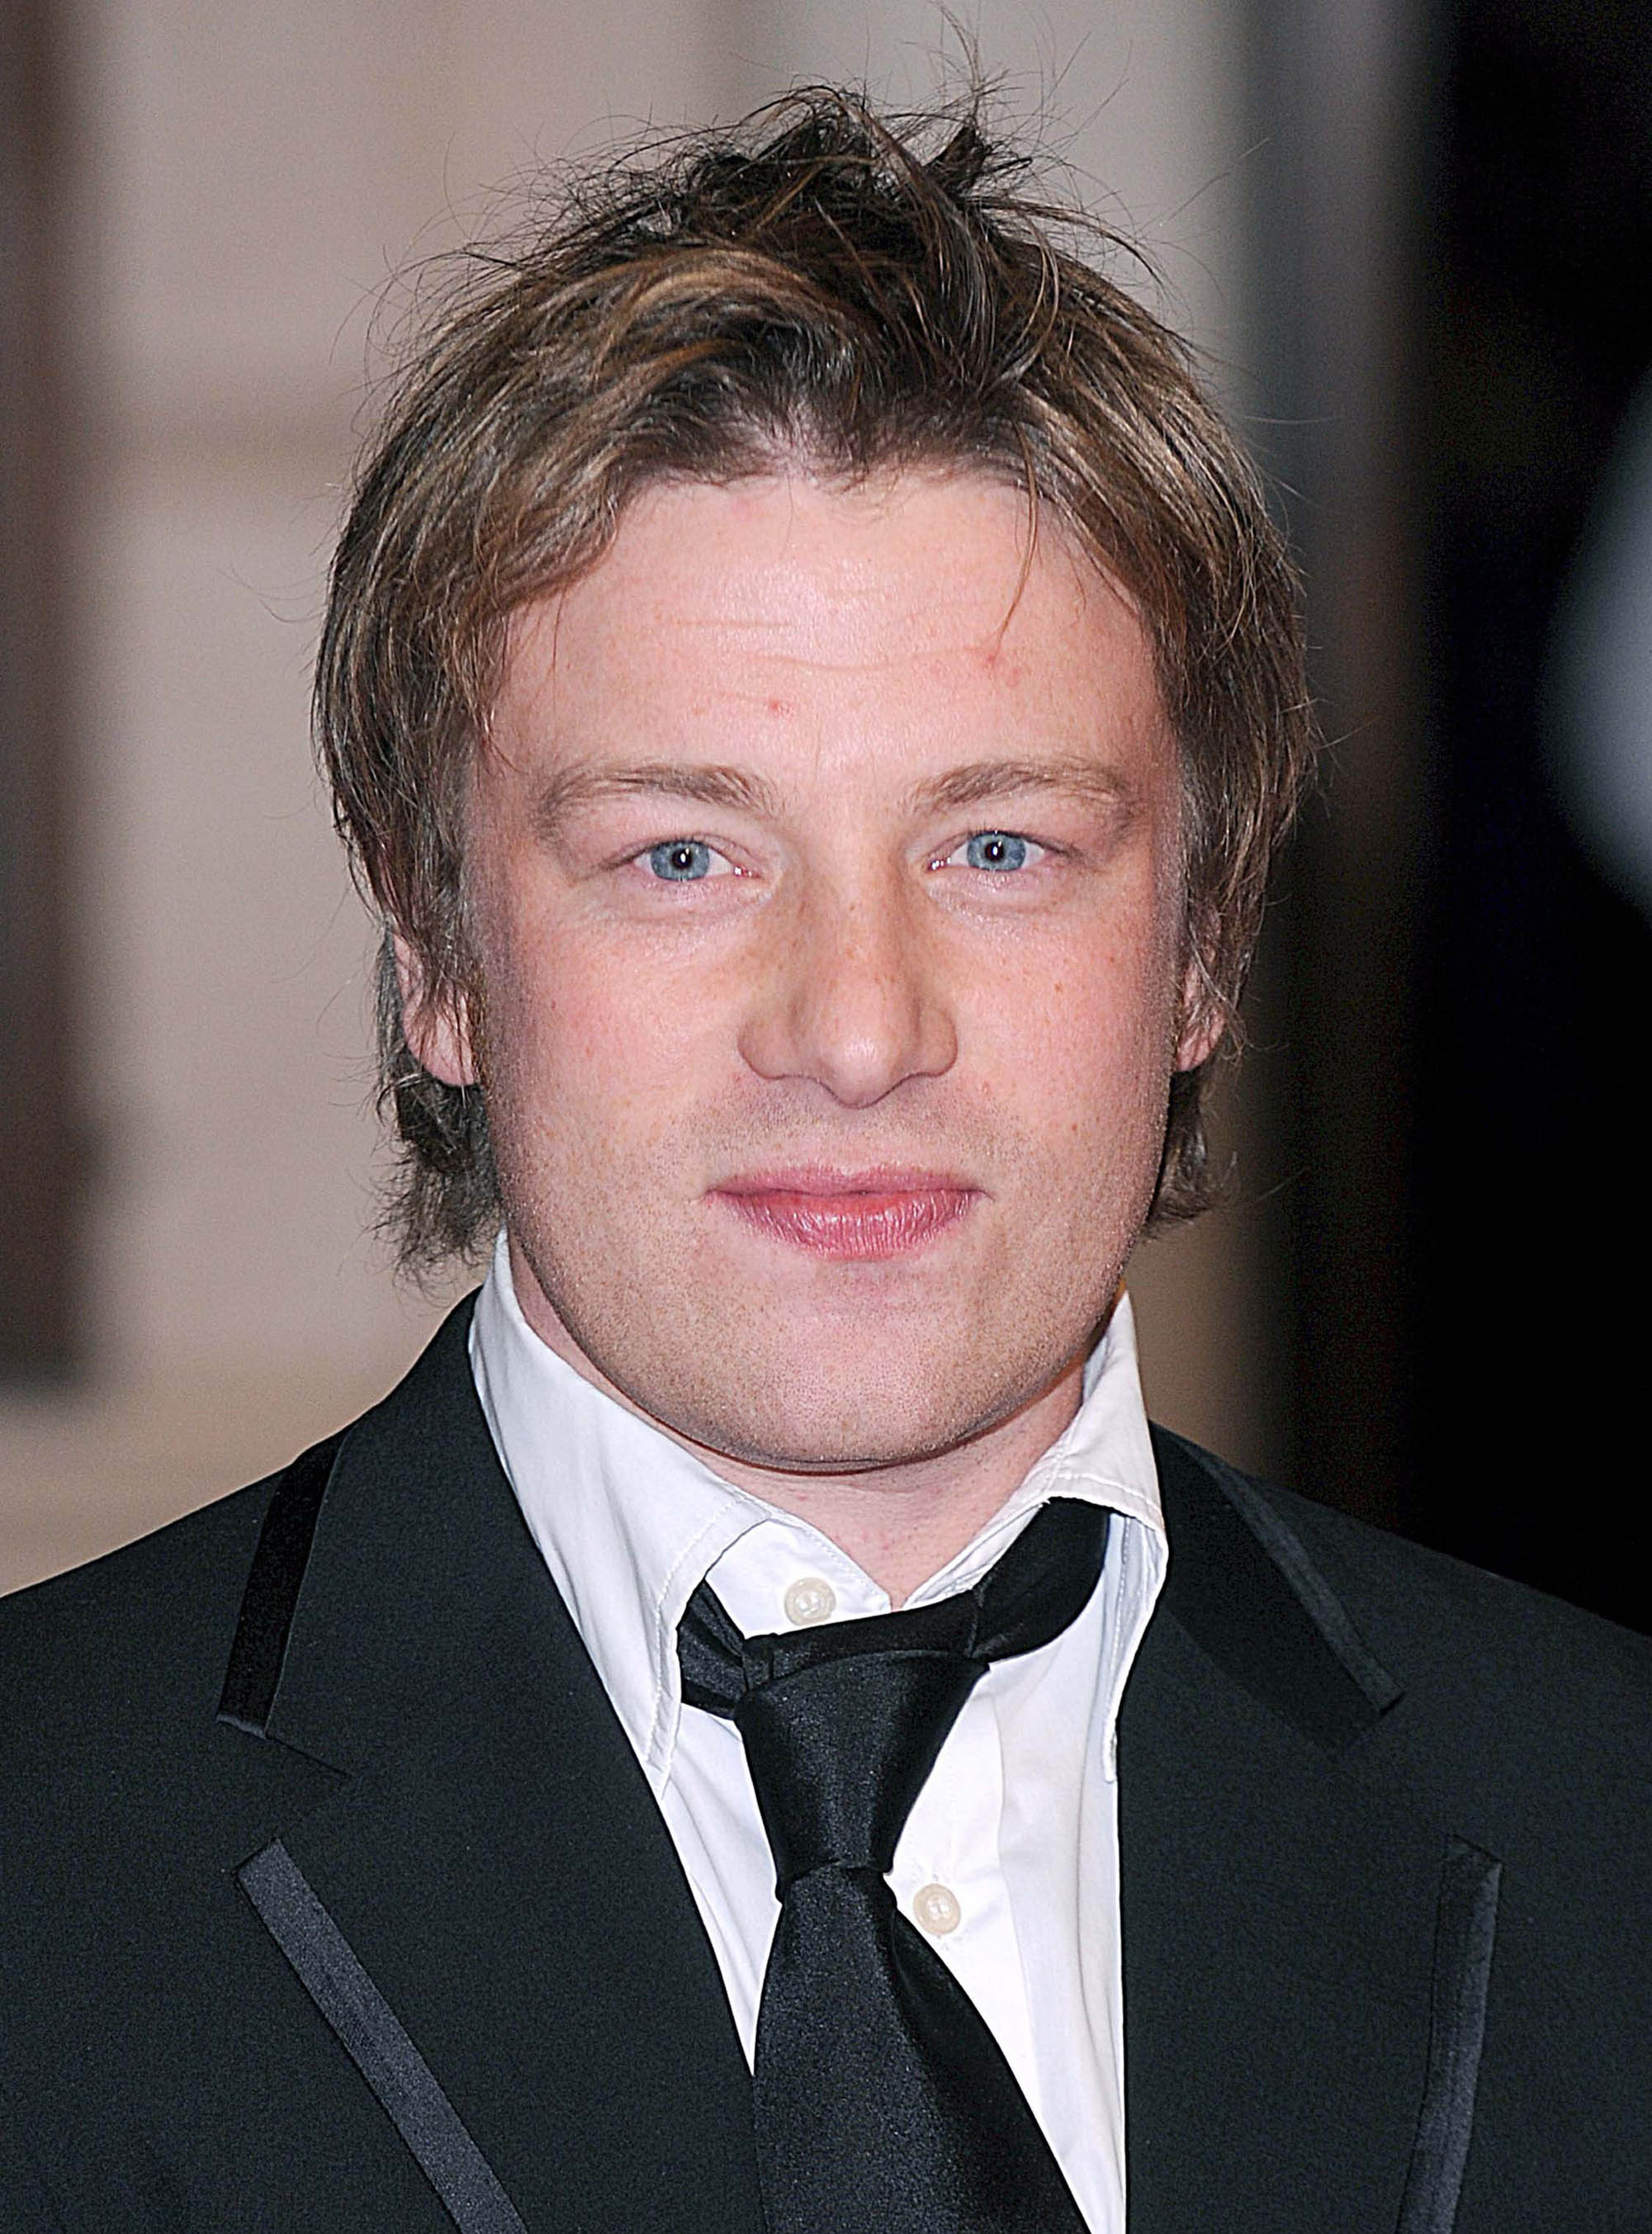 Jamie Oliver - English Chef of Top Richest Celebrity Chefs